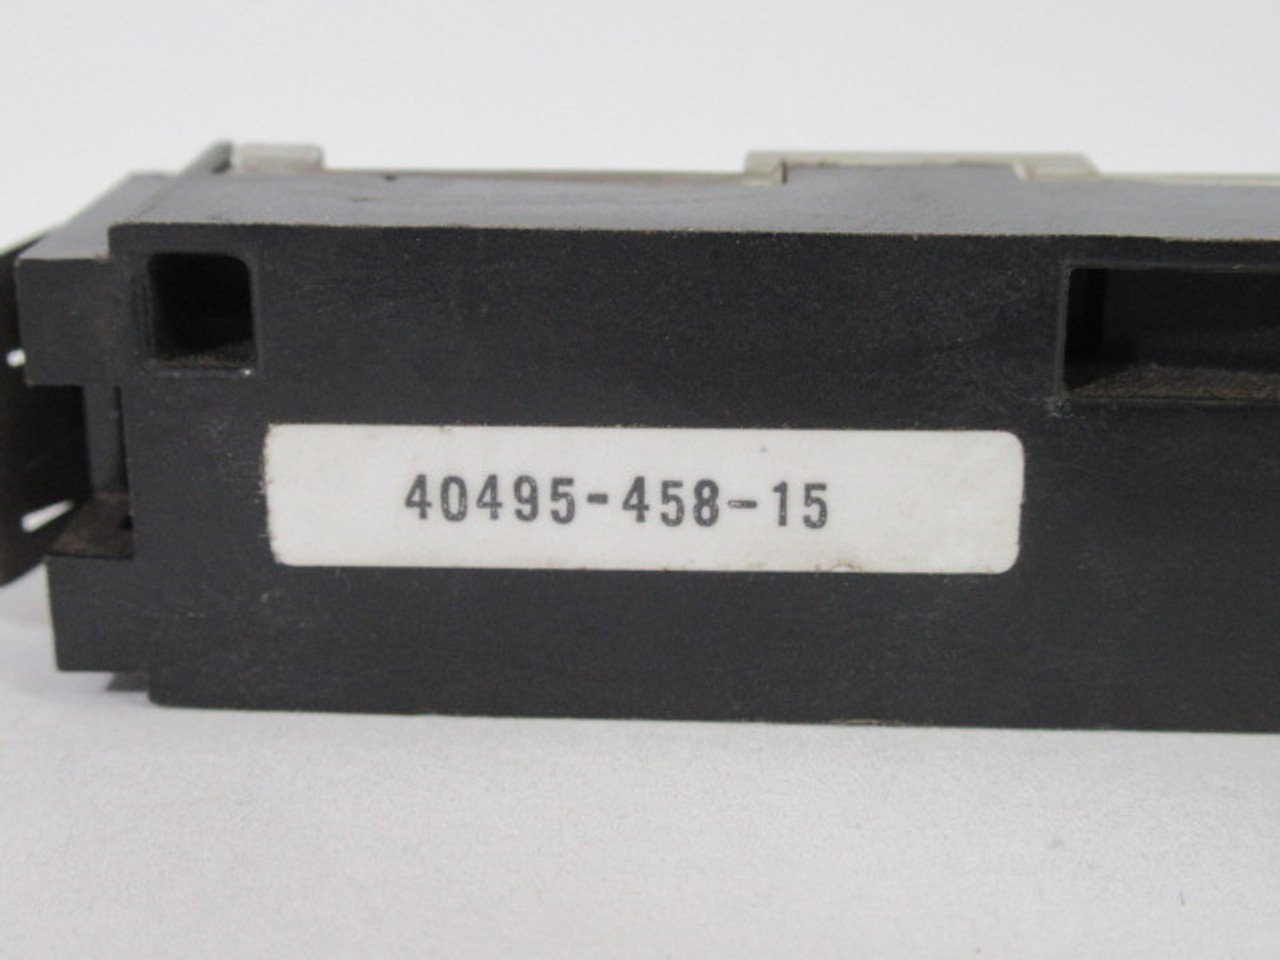 Allen-Bradley 40495-458-15 Auxiliary Contact Block 1 N.O. USED